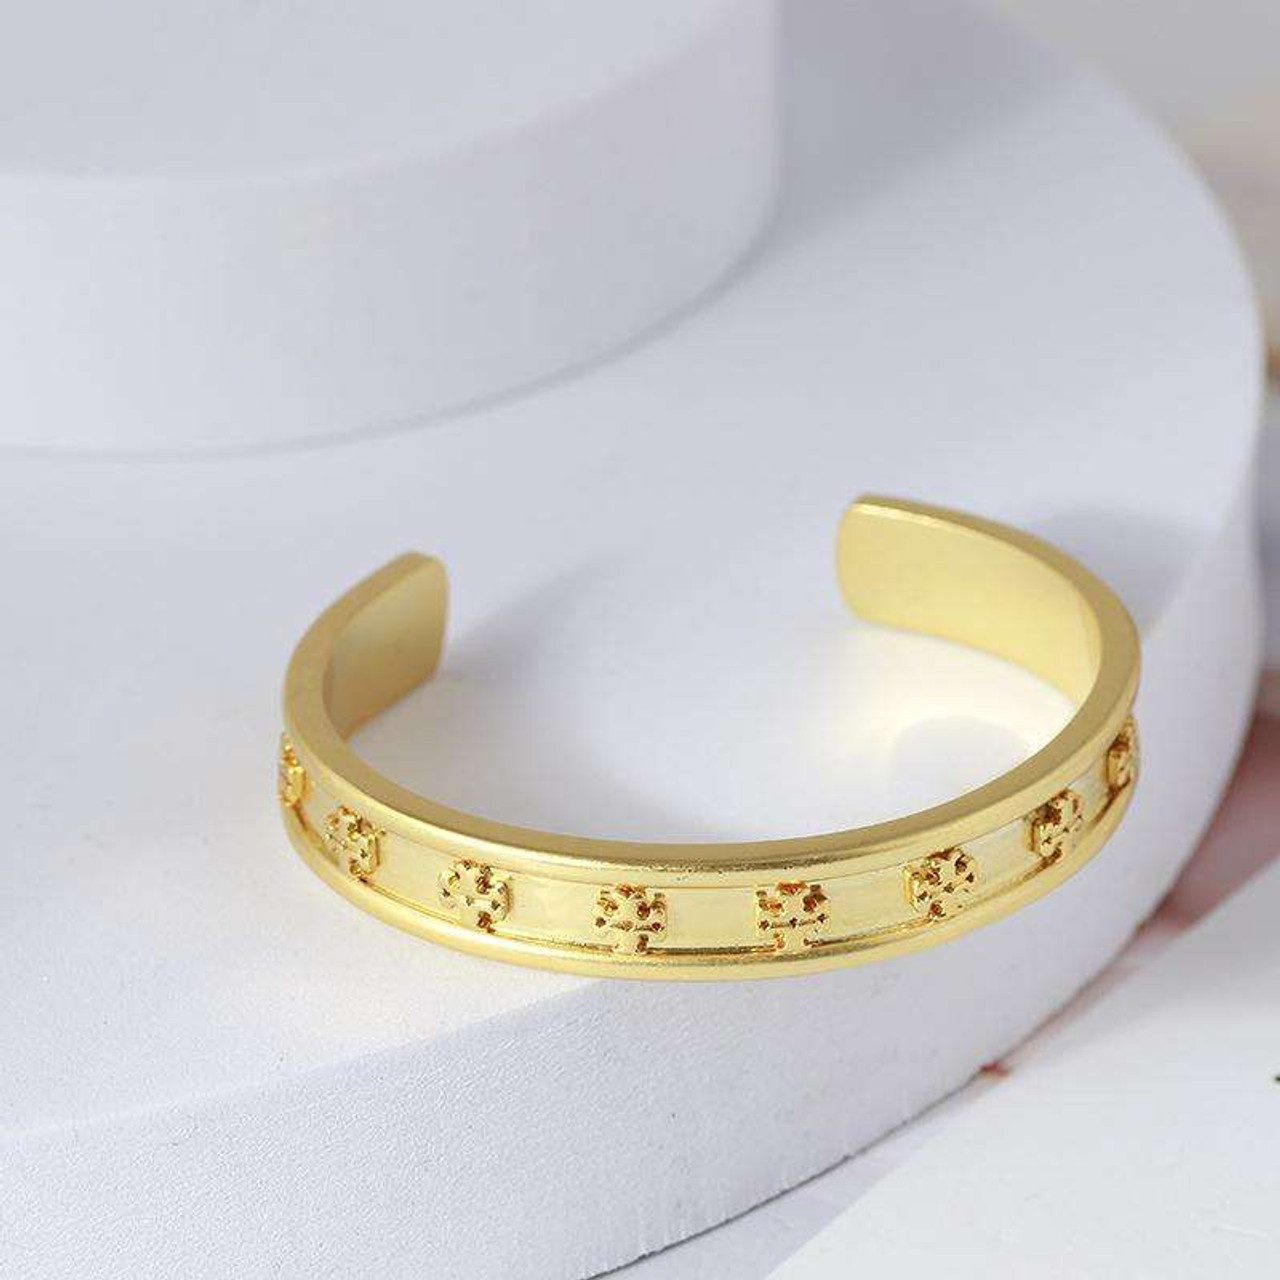 Tory Burch Logo Raised Gold Cuff Bracelet - Luxe Time